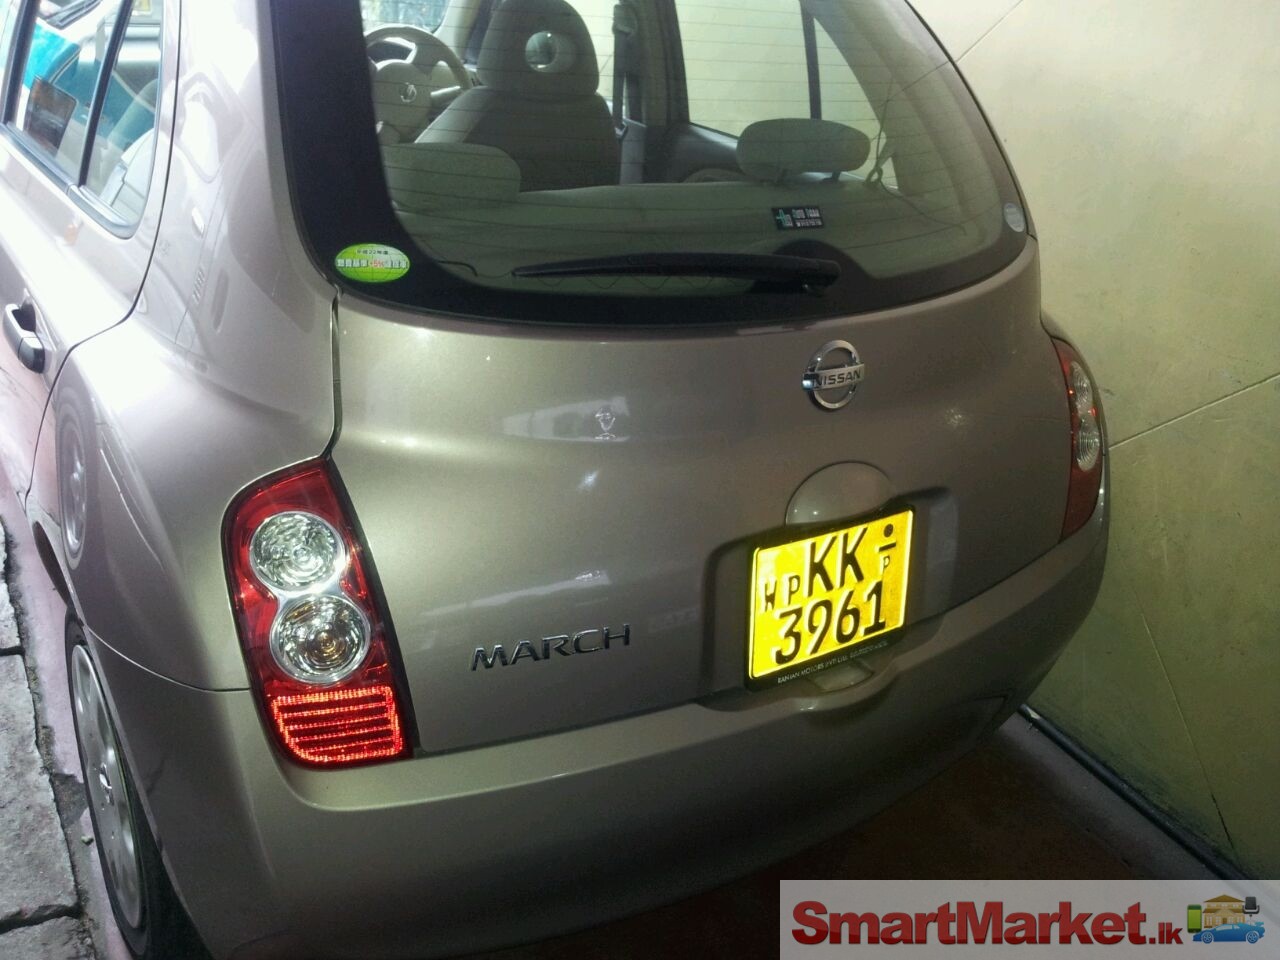 Nissan March beetle Registered (used) car available to buy.